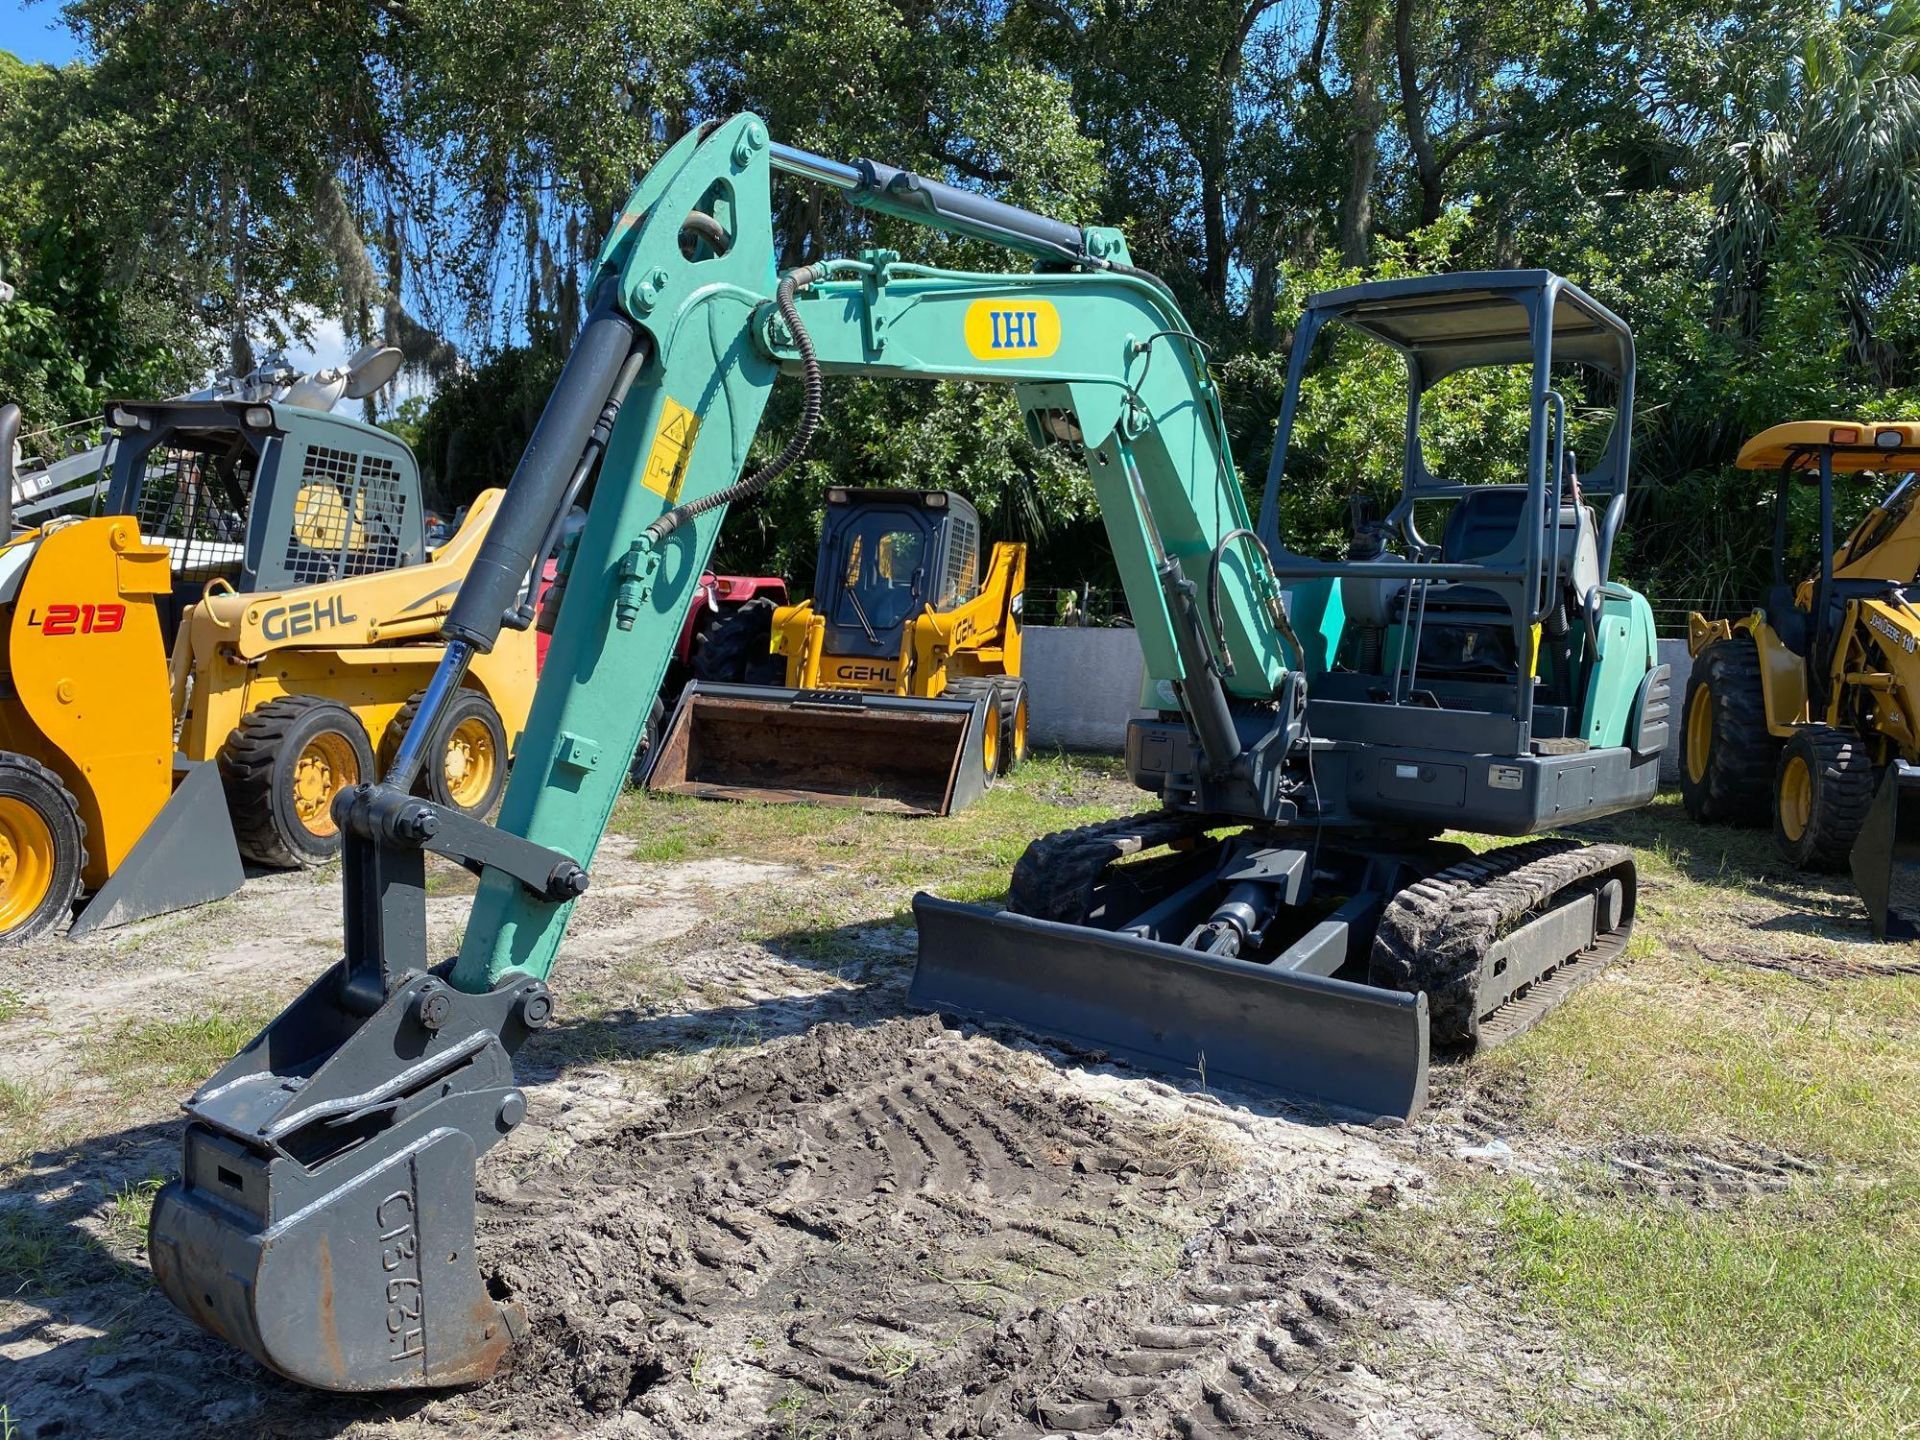 2012 IHI 35NE DIESEL EXCAVATOR, RUBBER TRACKS, FILL BLADE, BUCKET ATTACHMENT, RUNS AND OPERATES - Image 2 of 8